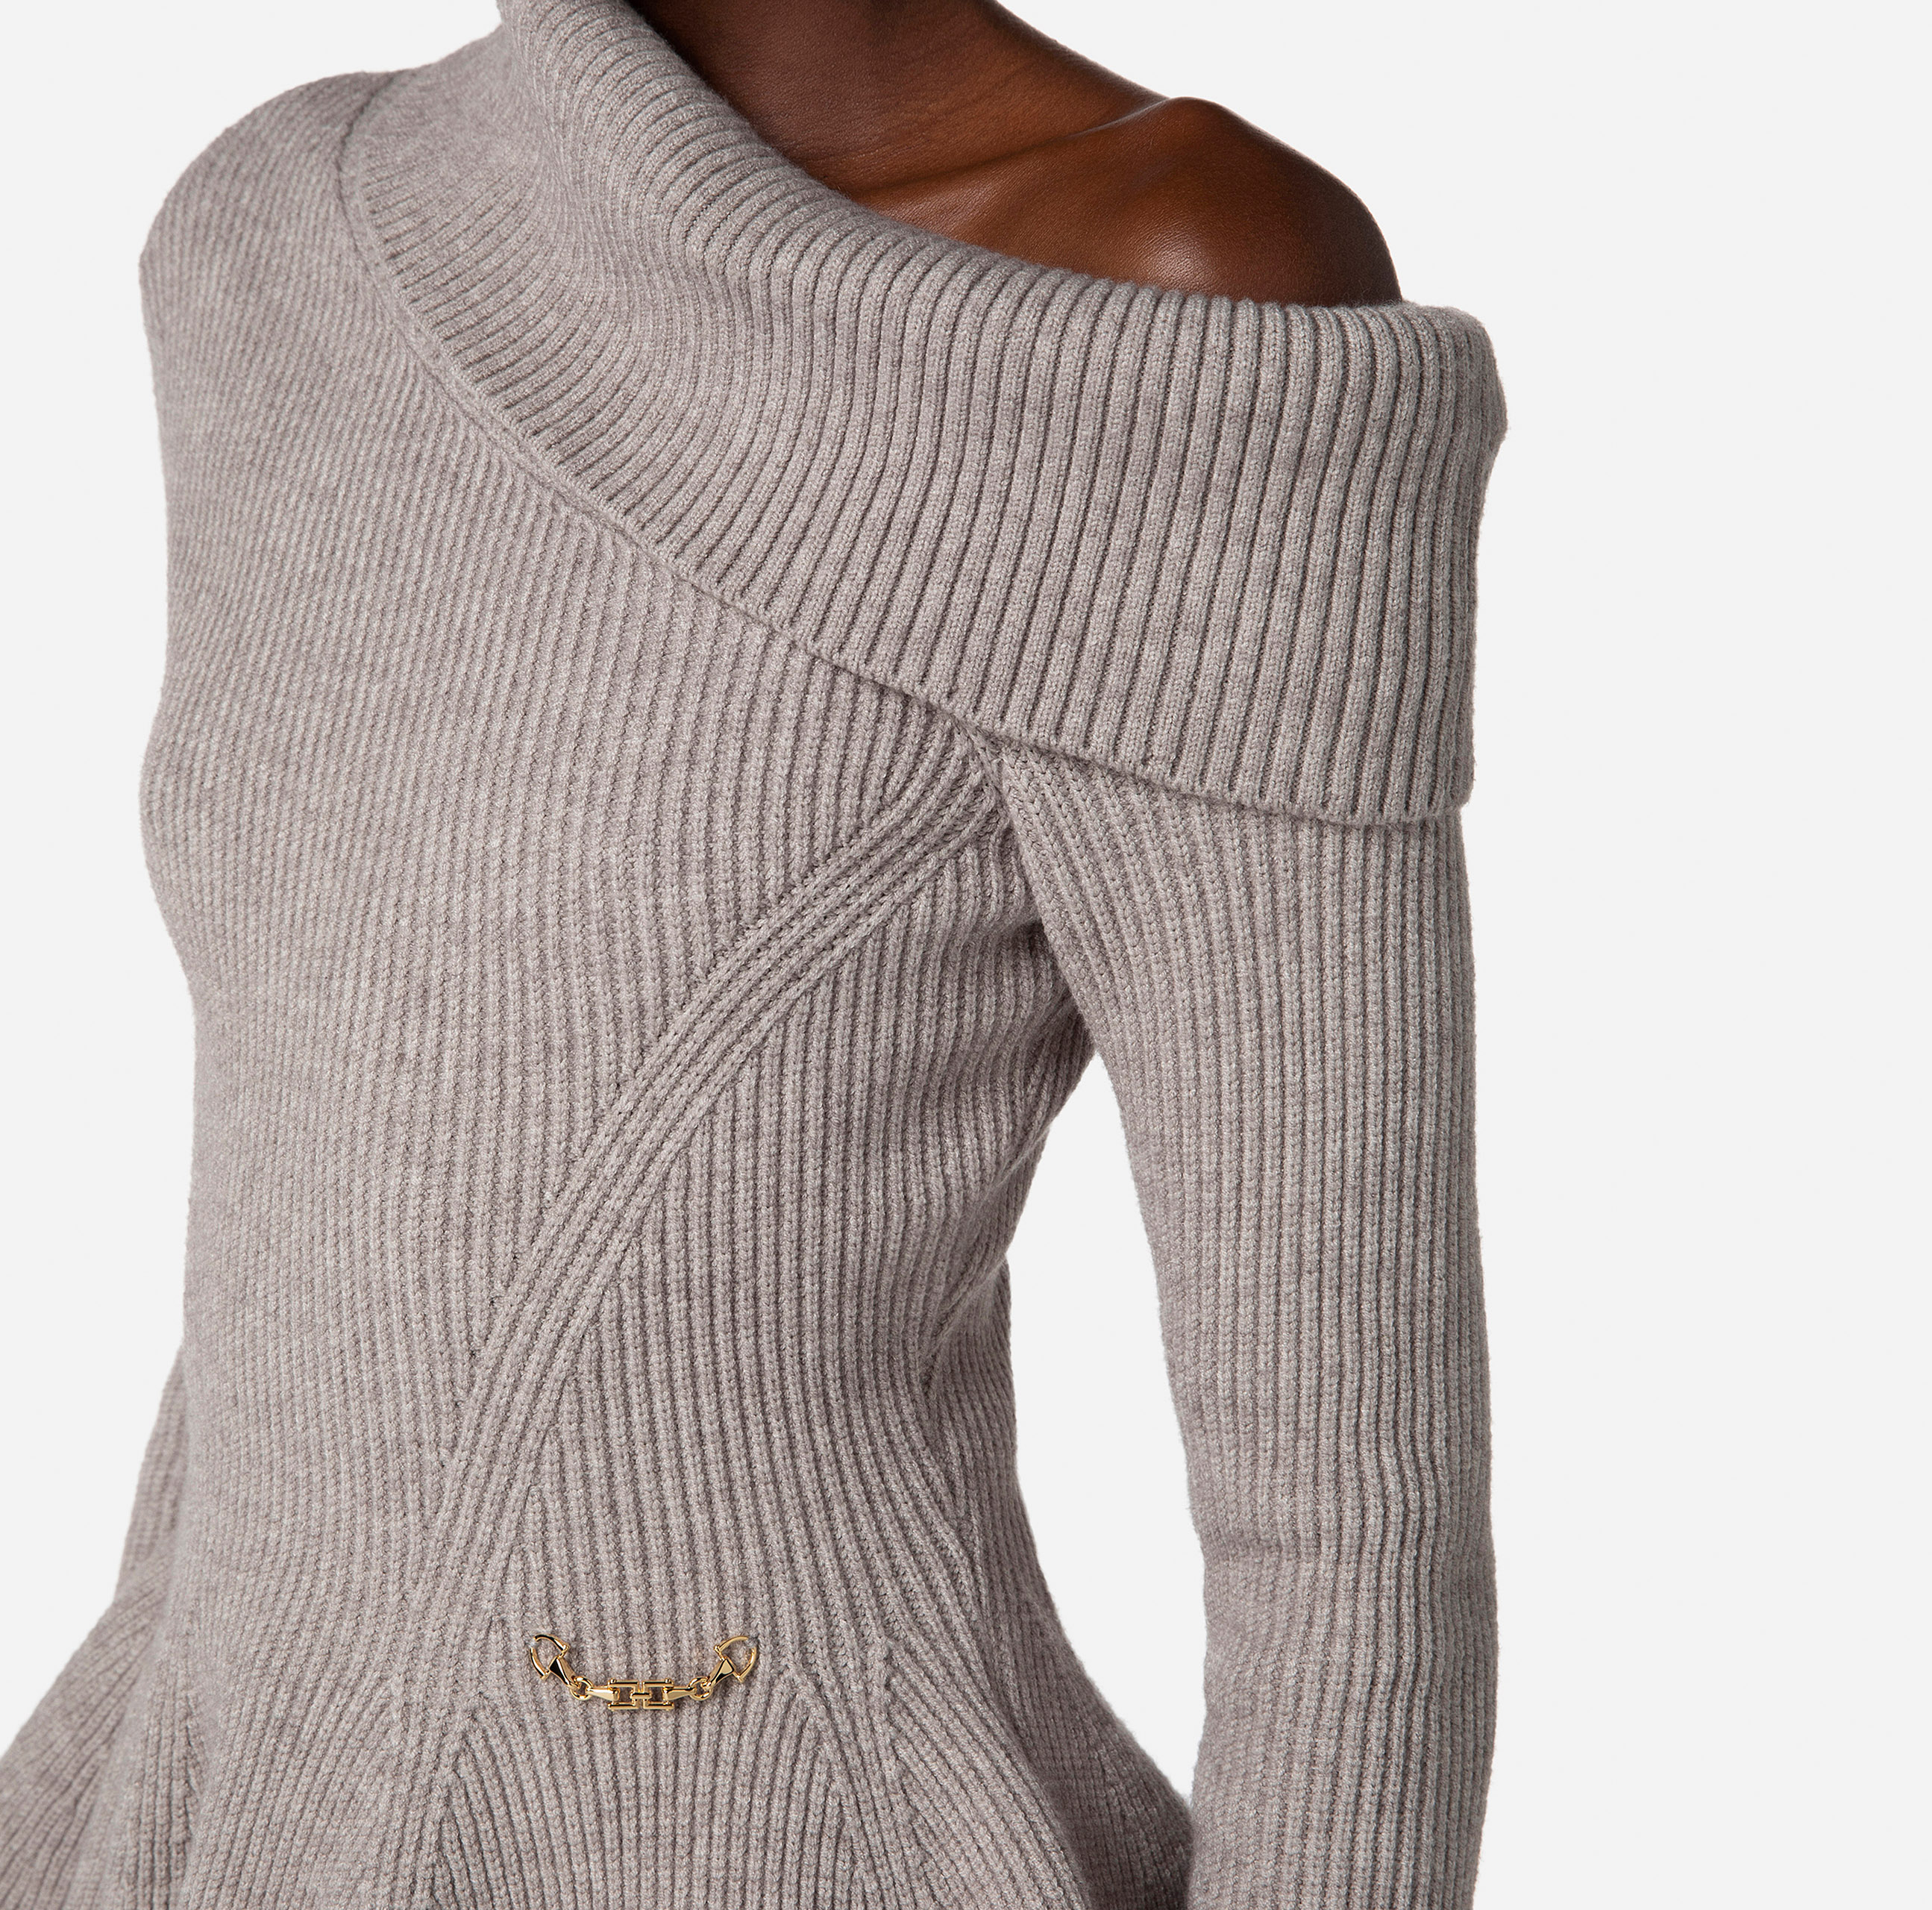 Knit pullover with gore - Elisabetta Franchi